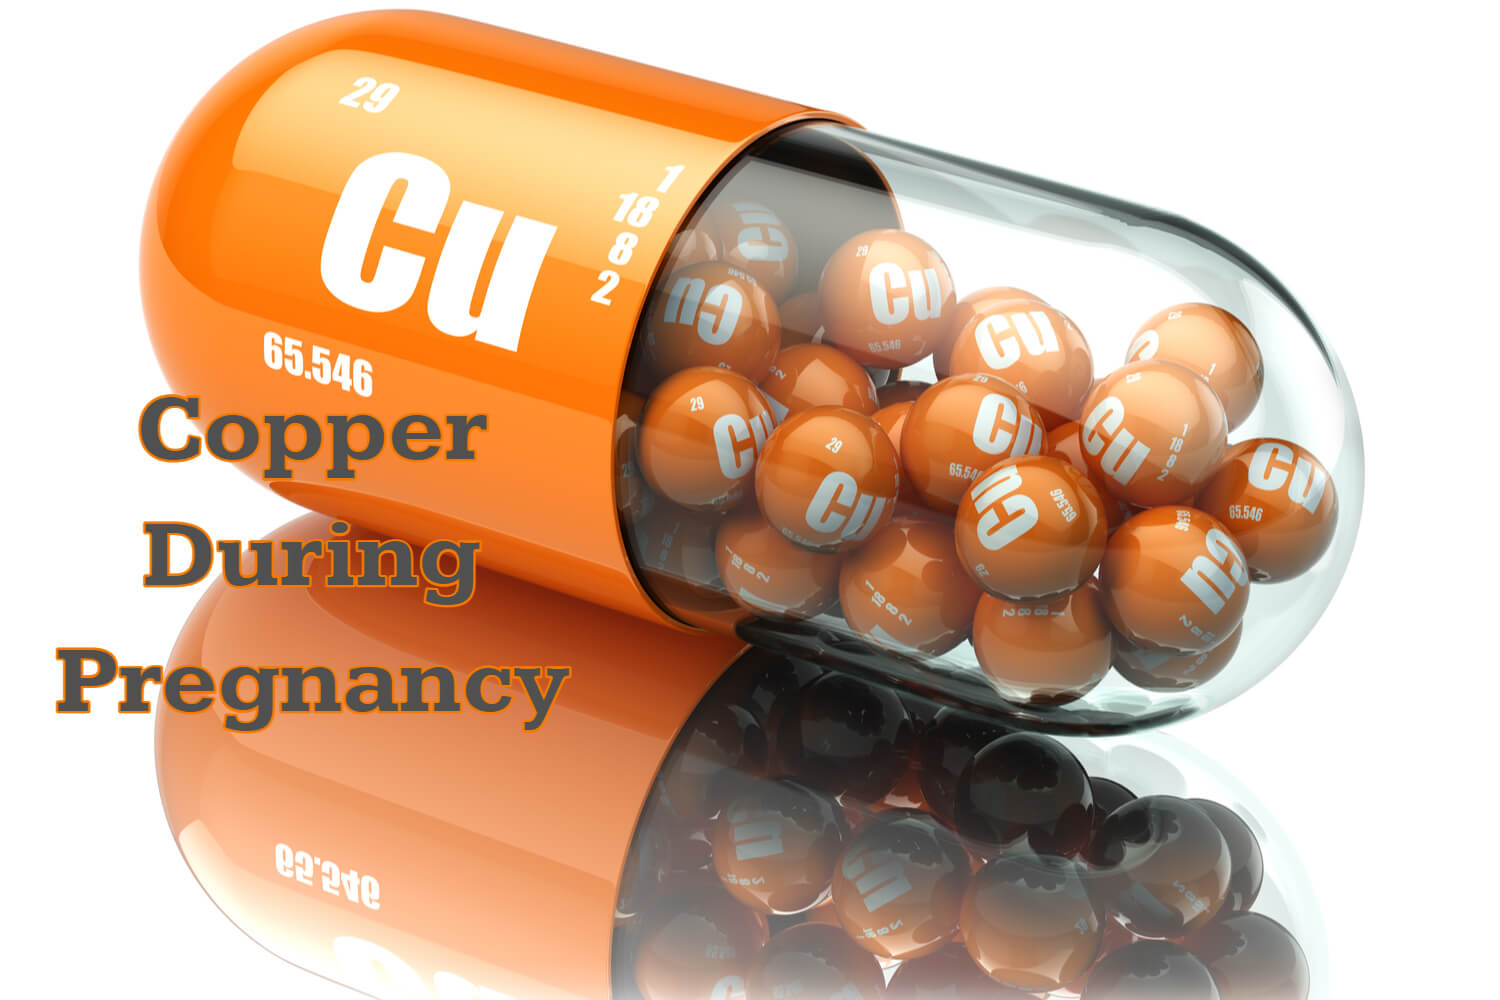 Copper During Pregnancy